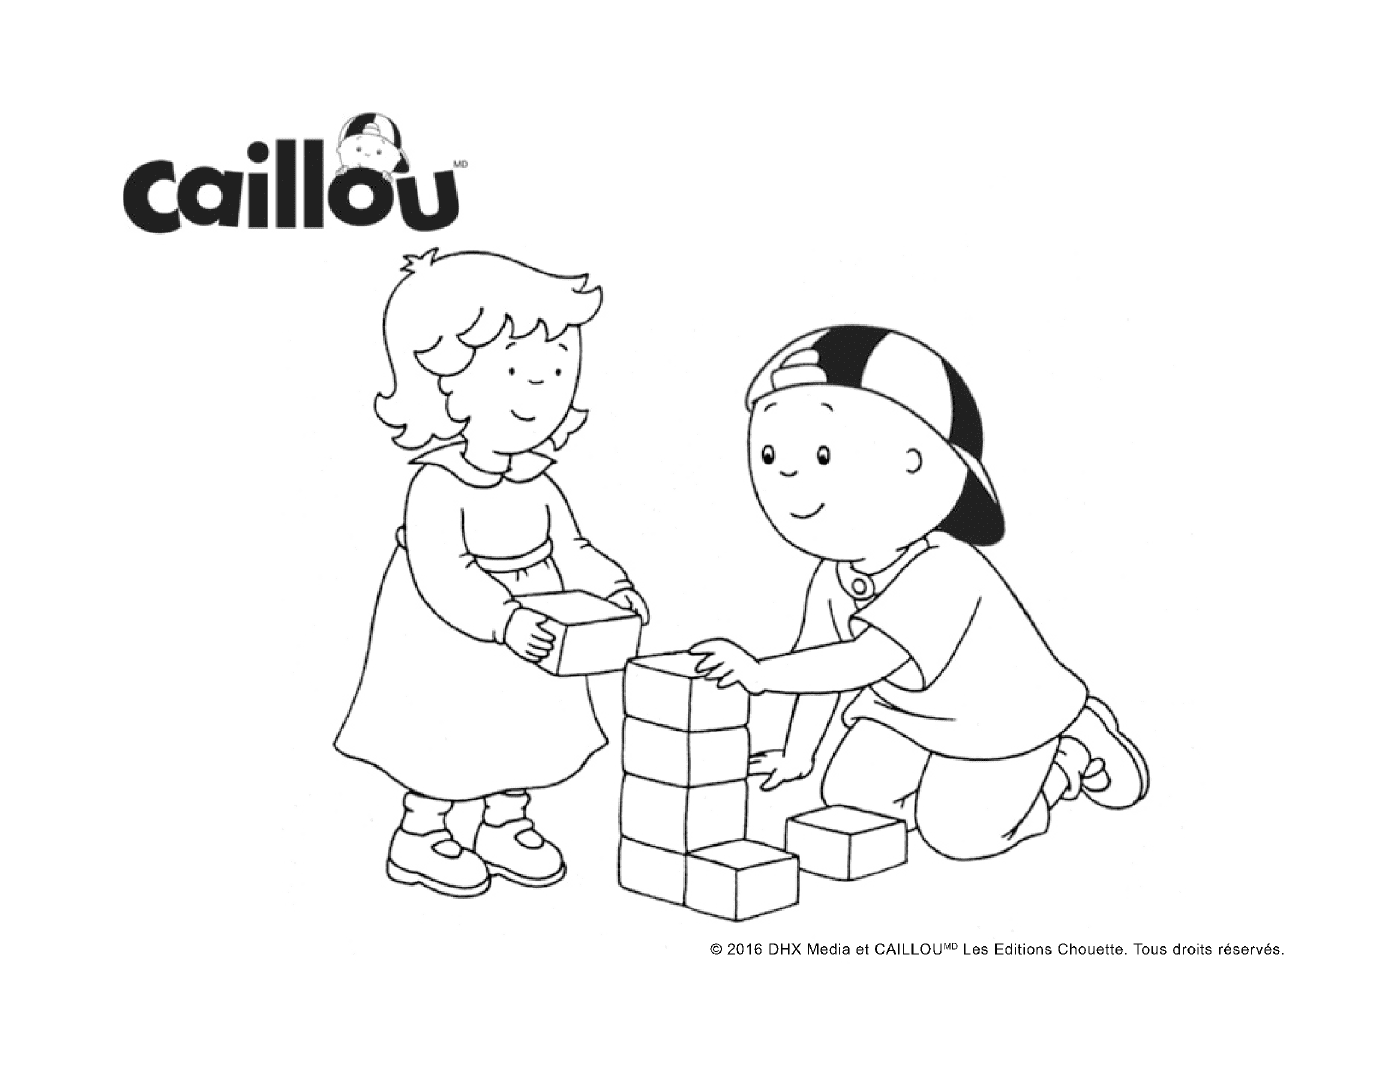  Block game with Caillou and his little sister 